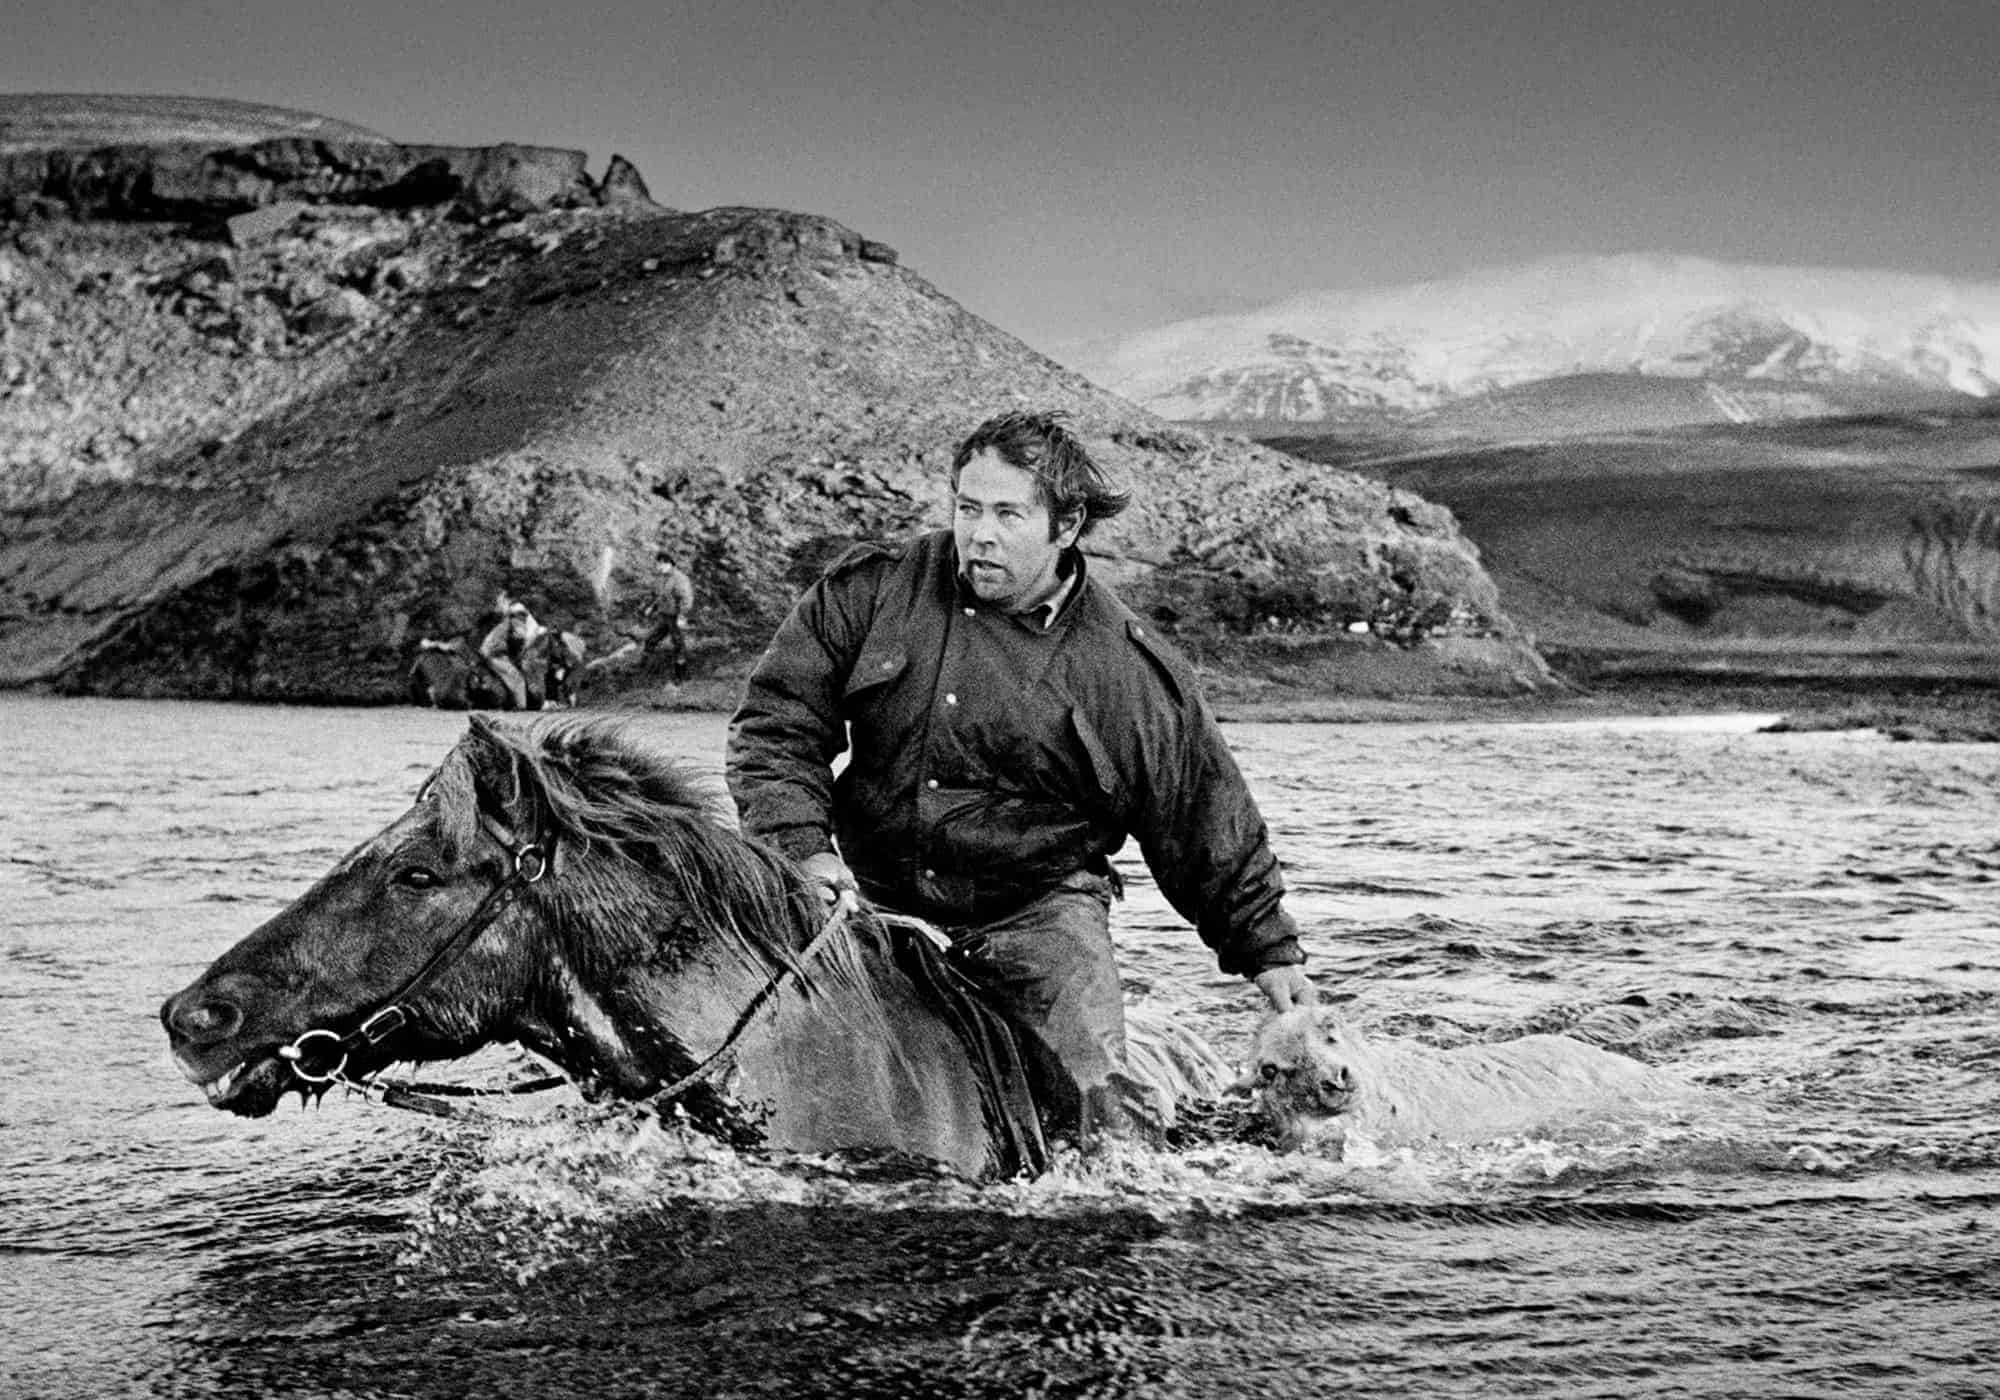 Man on horseback crossing a deep river in the arctic.